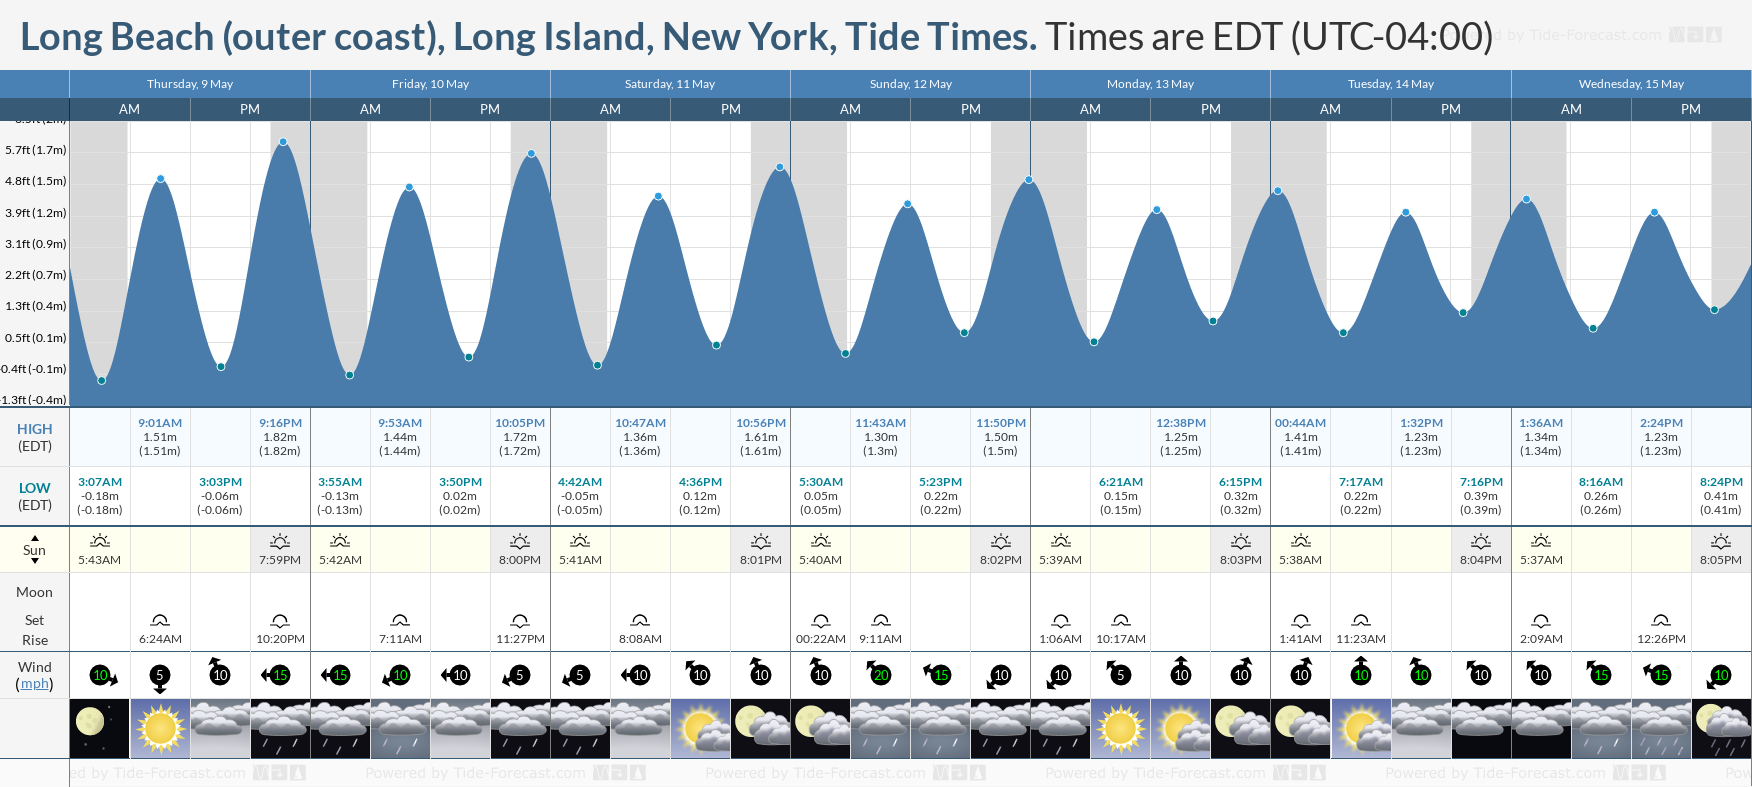 Long Beach (outer coast), Long Island, New York Tide Chart including high and low tide tide times for the next 7 days